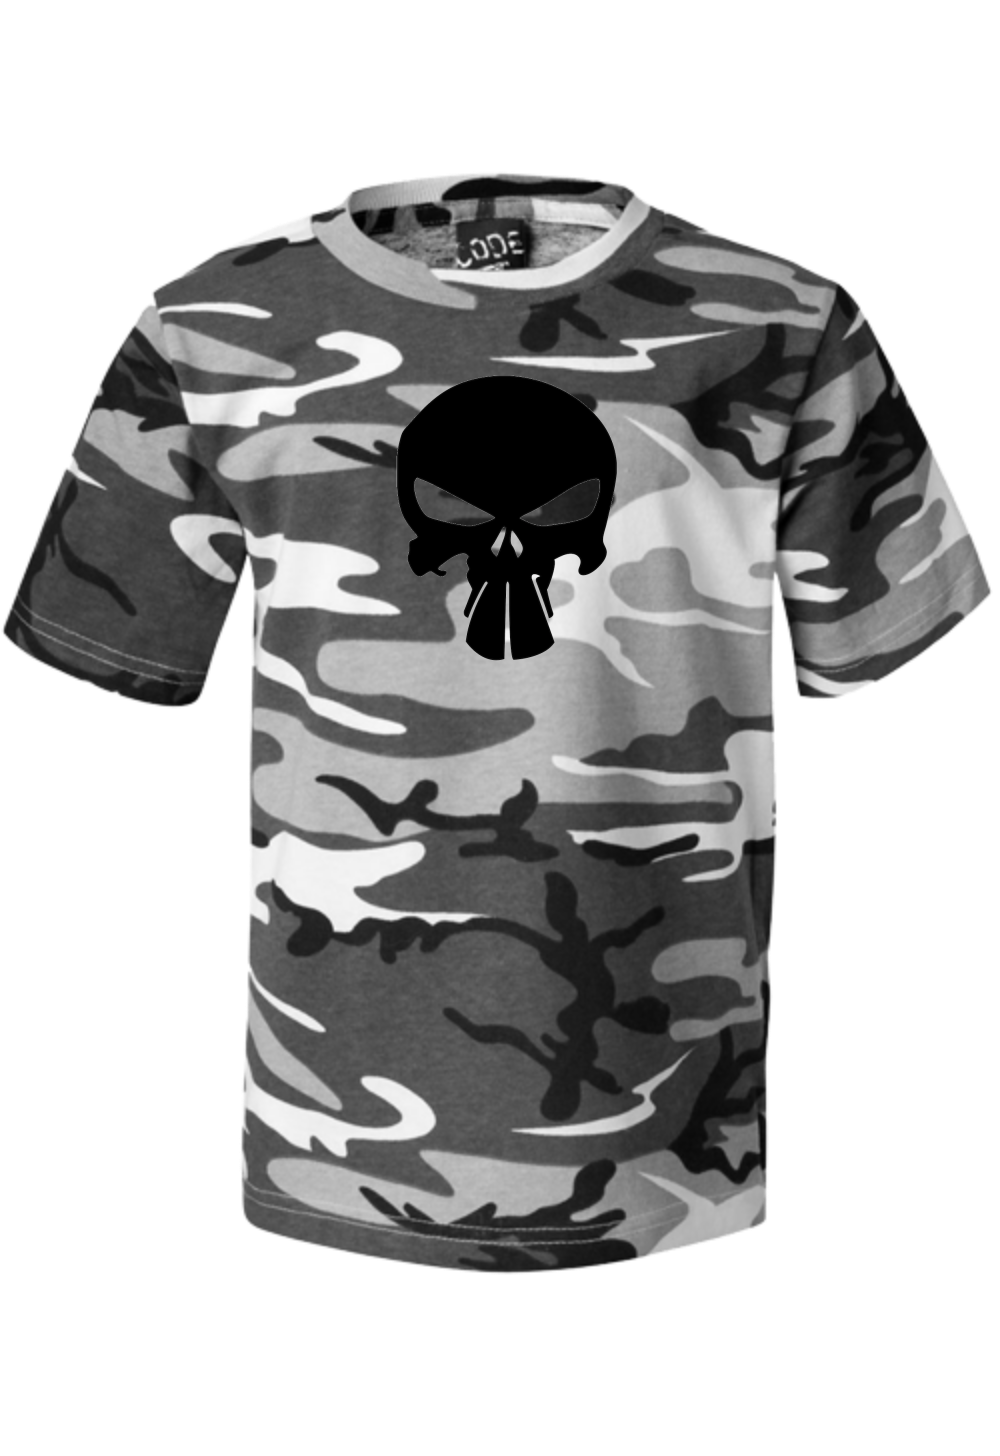 Camouflage T-Shirt PNG Photo Image